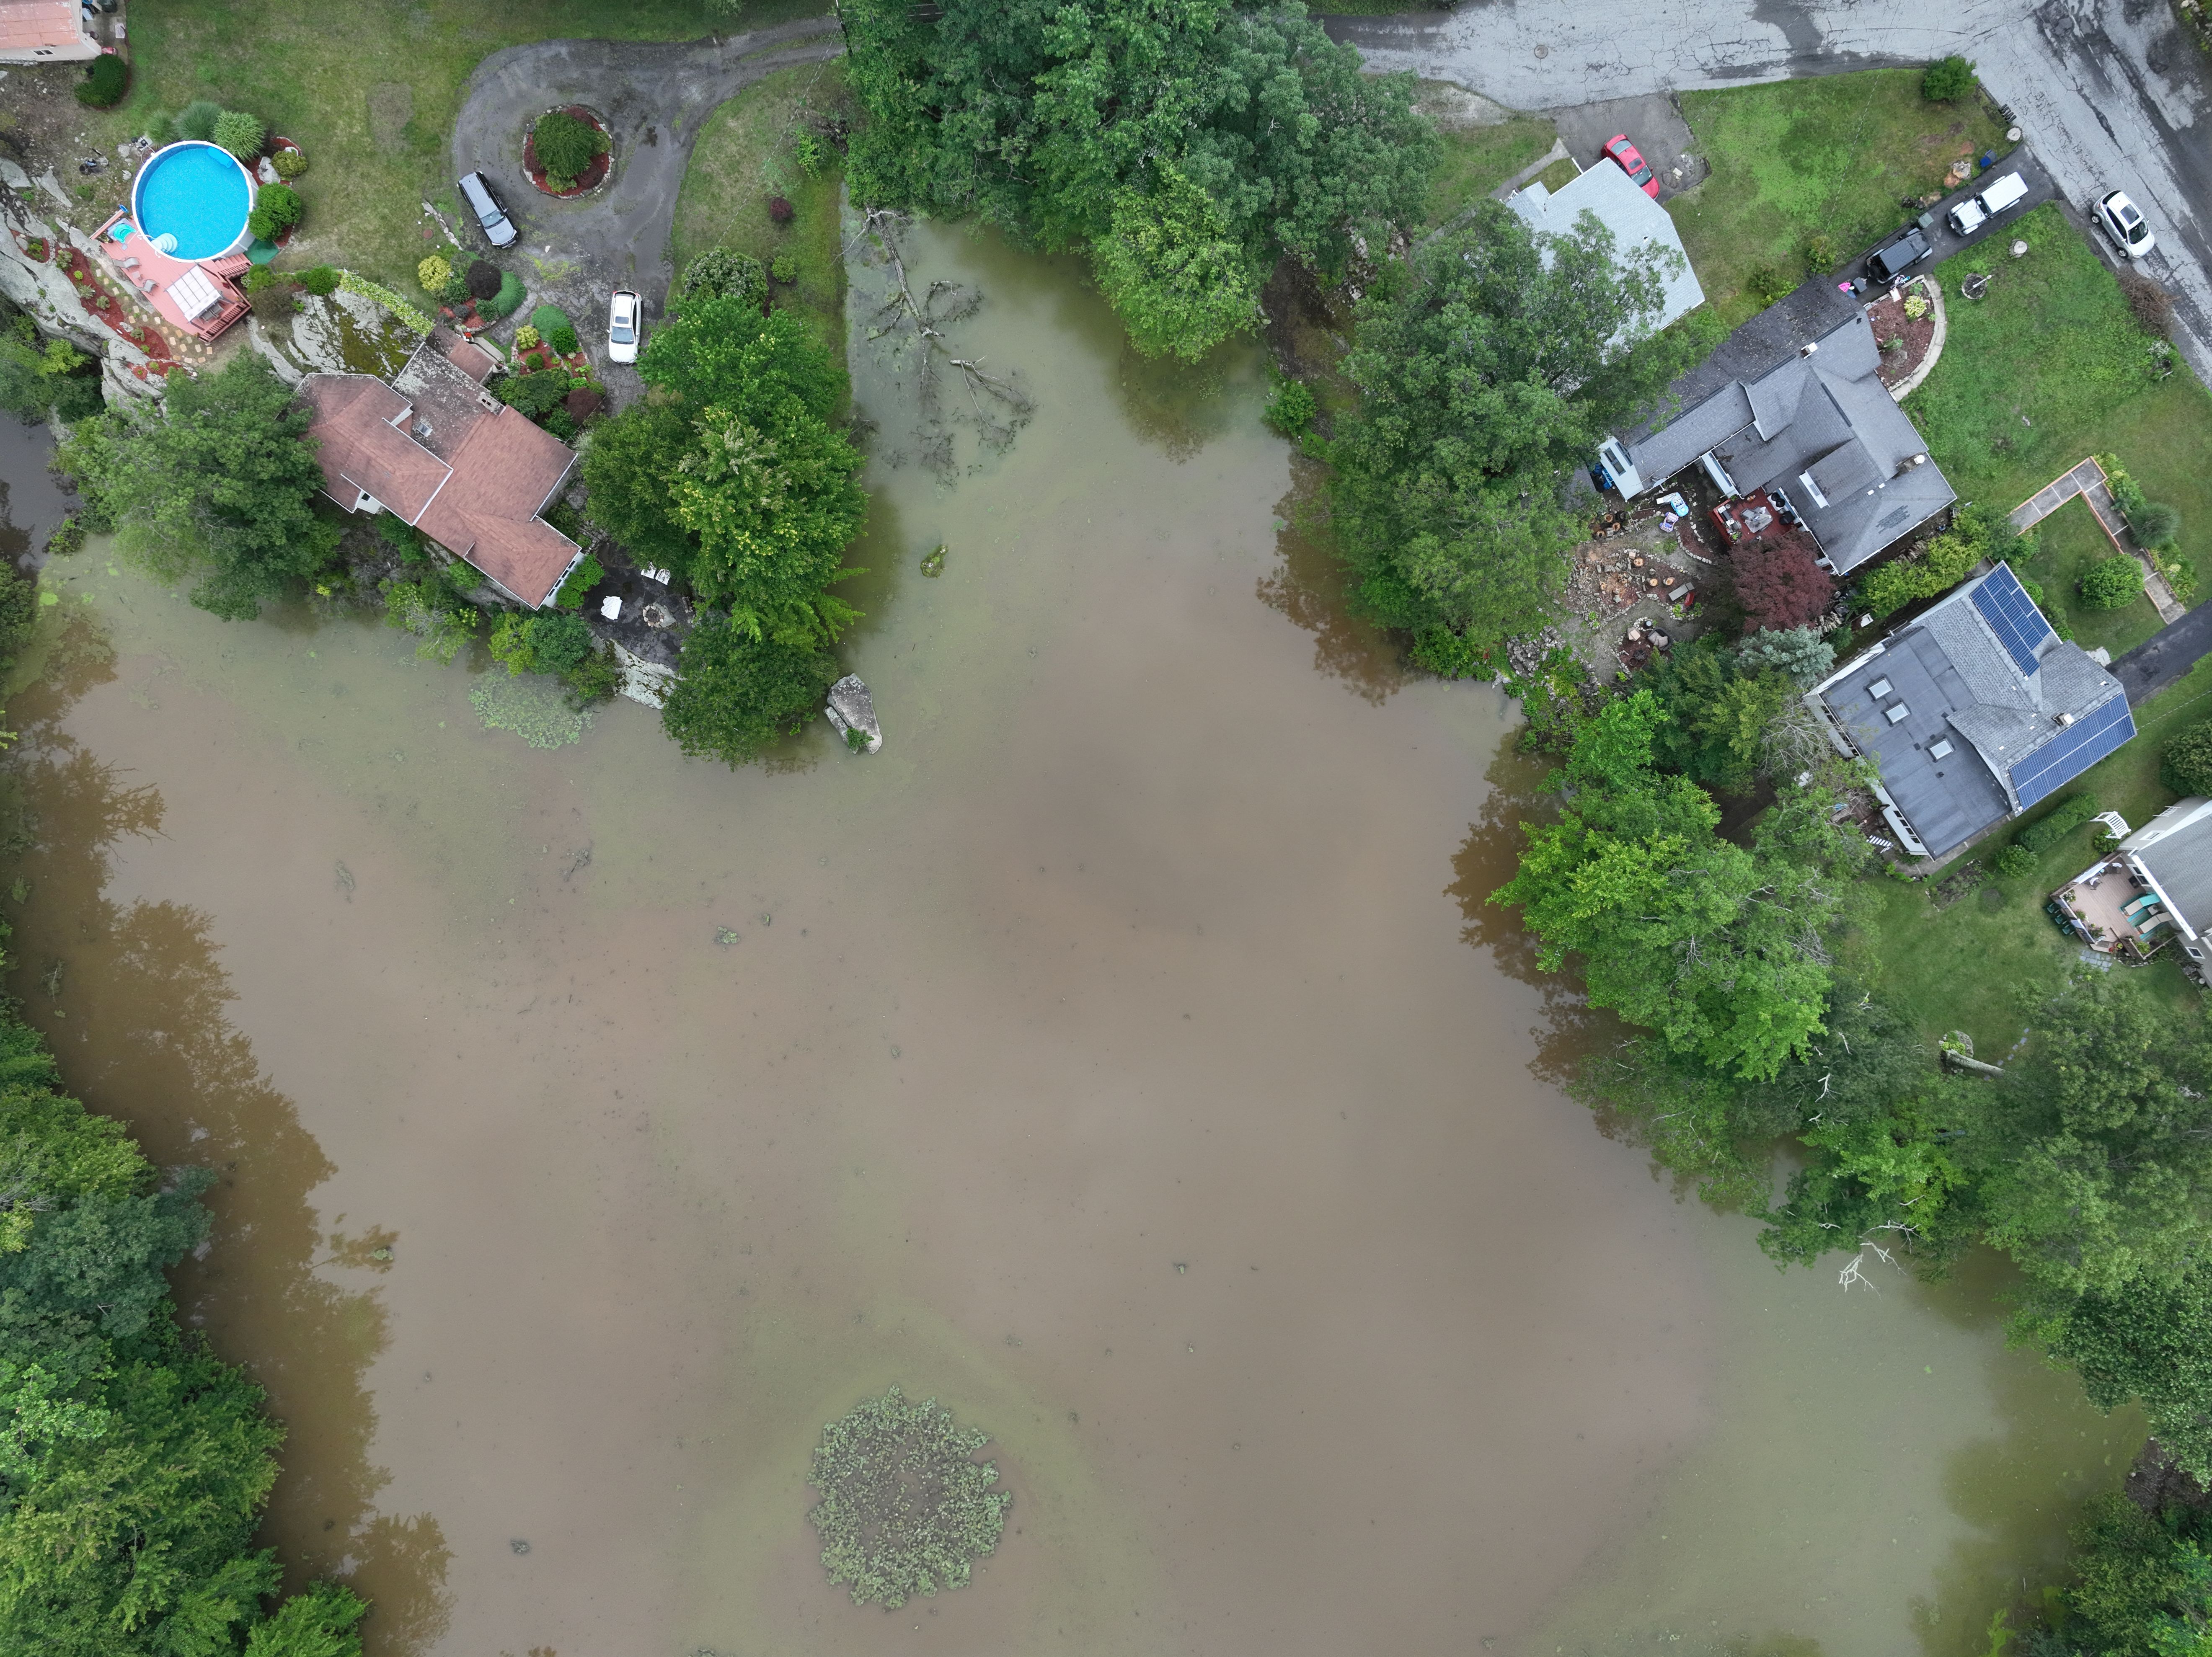 An aerial view shows flooding after historic rainfall north of New York City triggered dozens of water rescues and led to roadways being washed out after more than a half-foot of rain fell in only a few hours Sunday in Orange County, New York, United States on July 10.